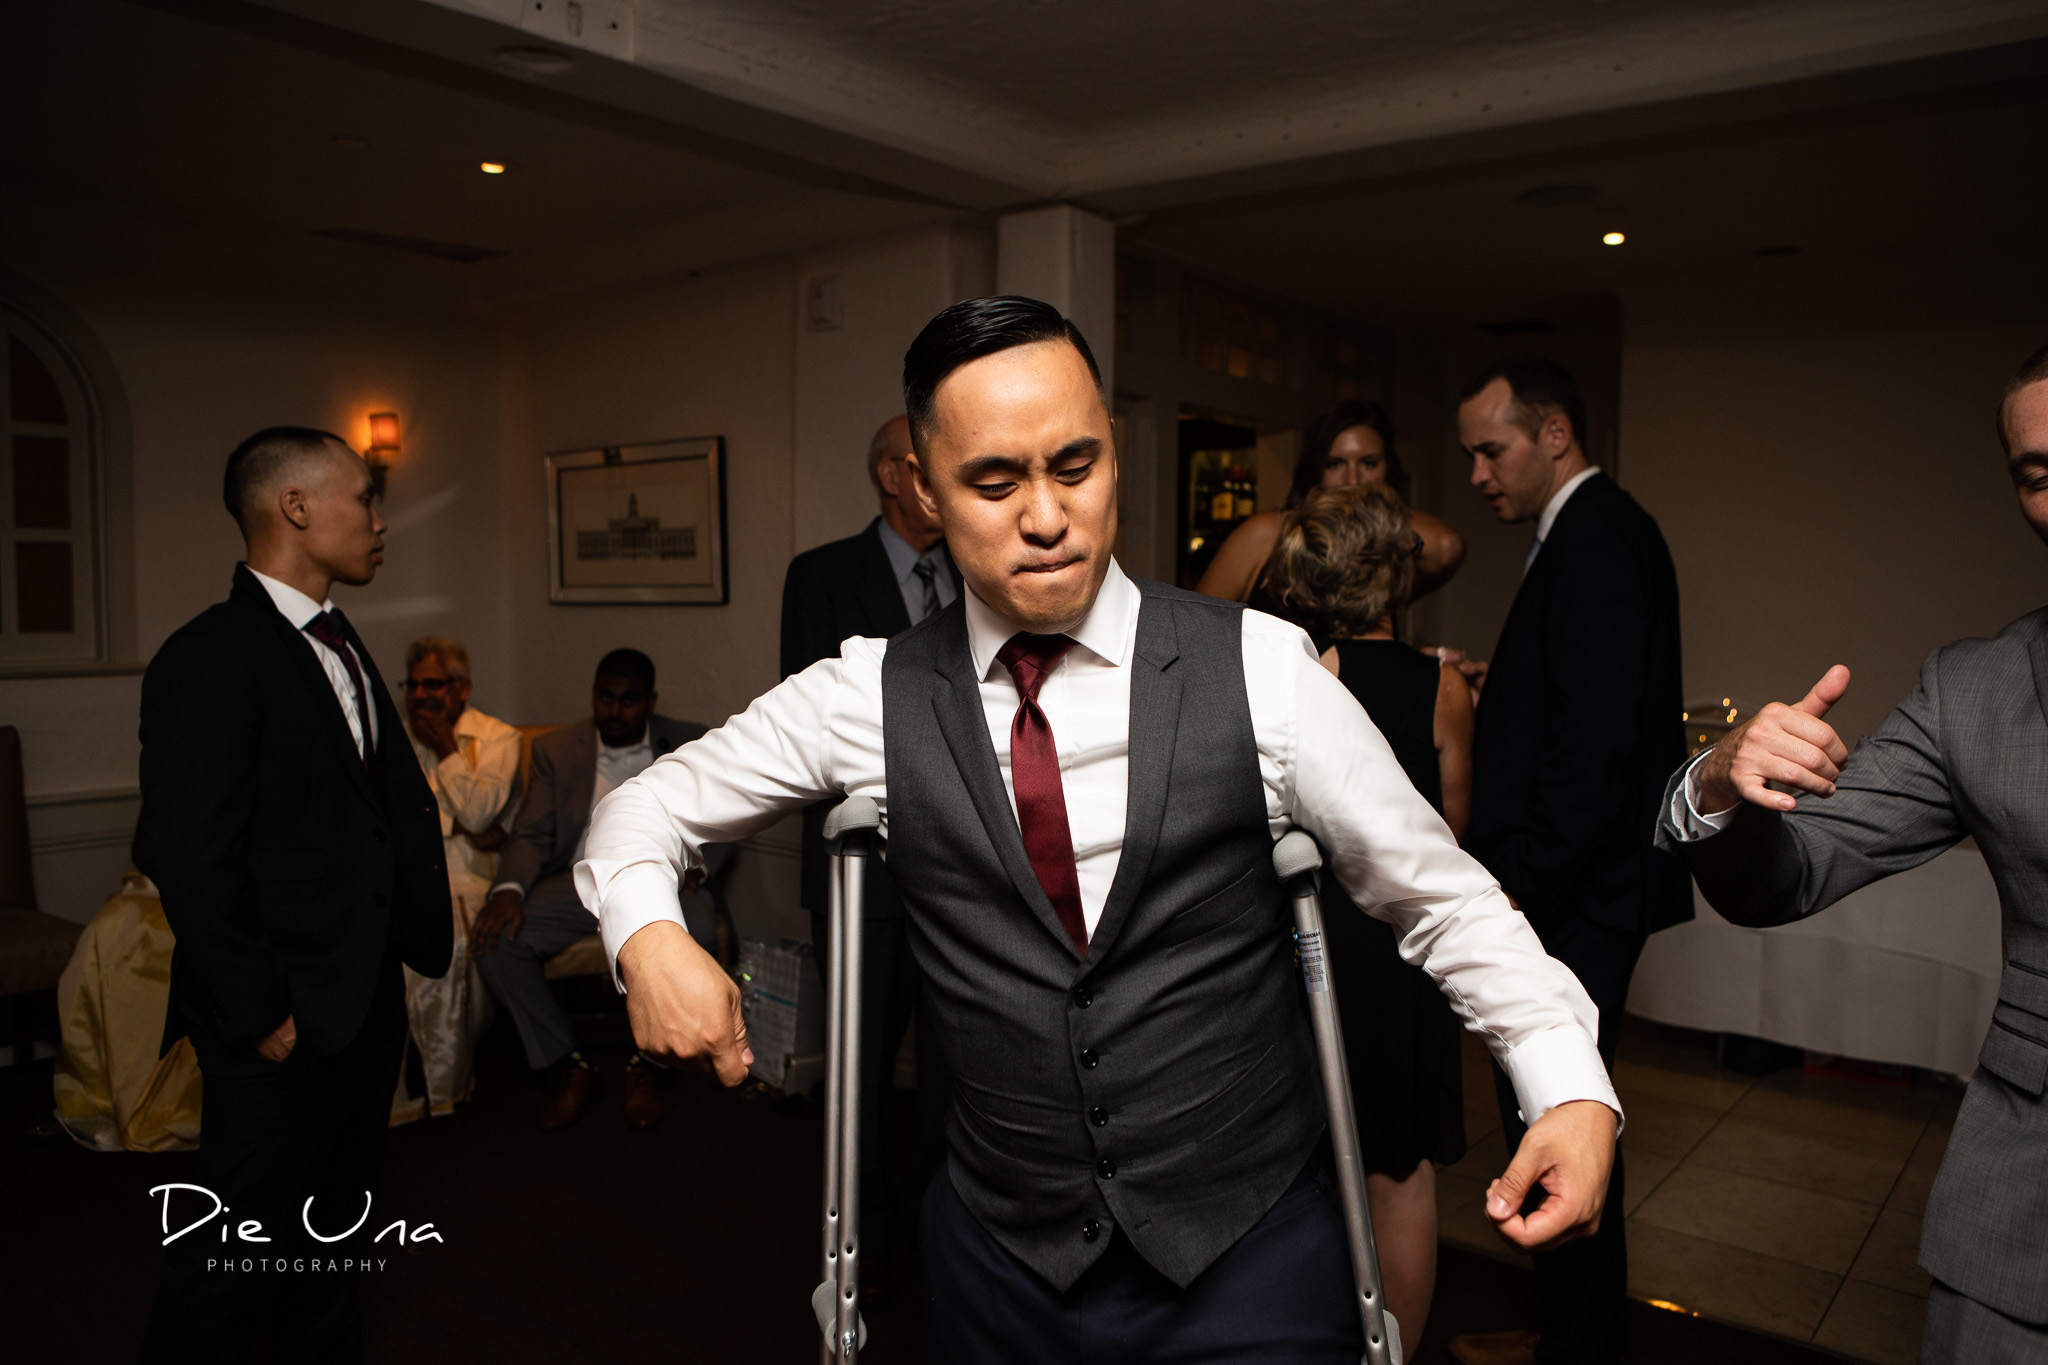 groom dancing during reception with crutches during wedding reception.jpg